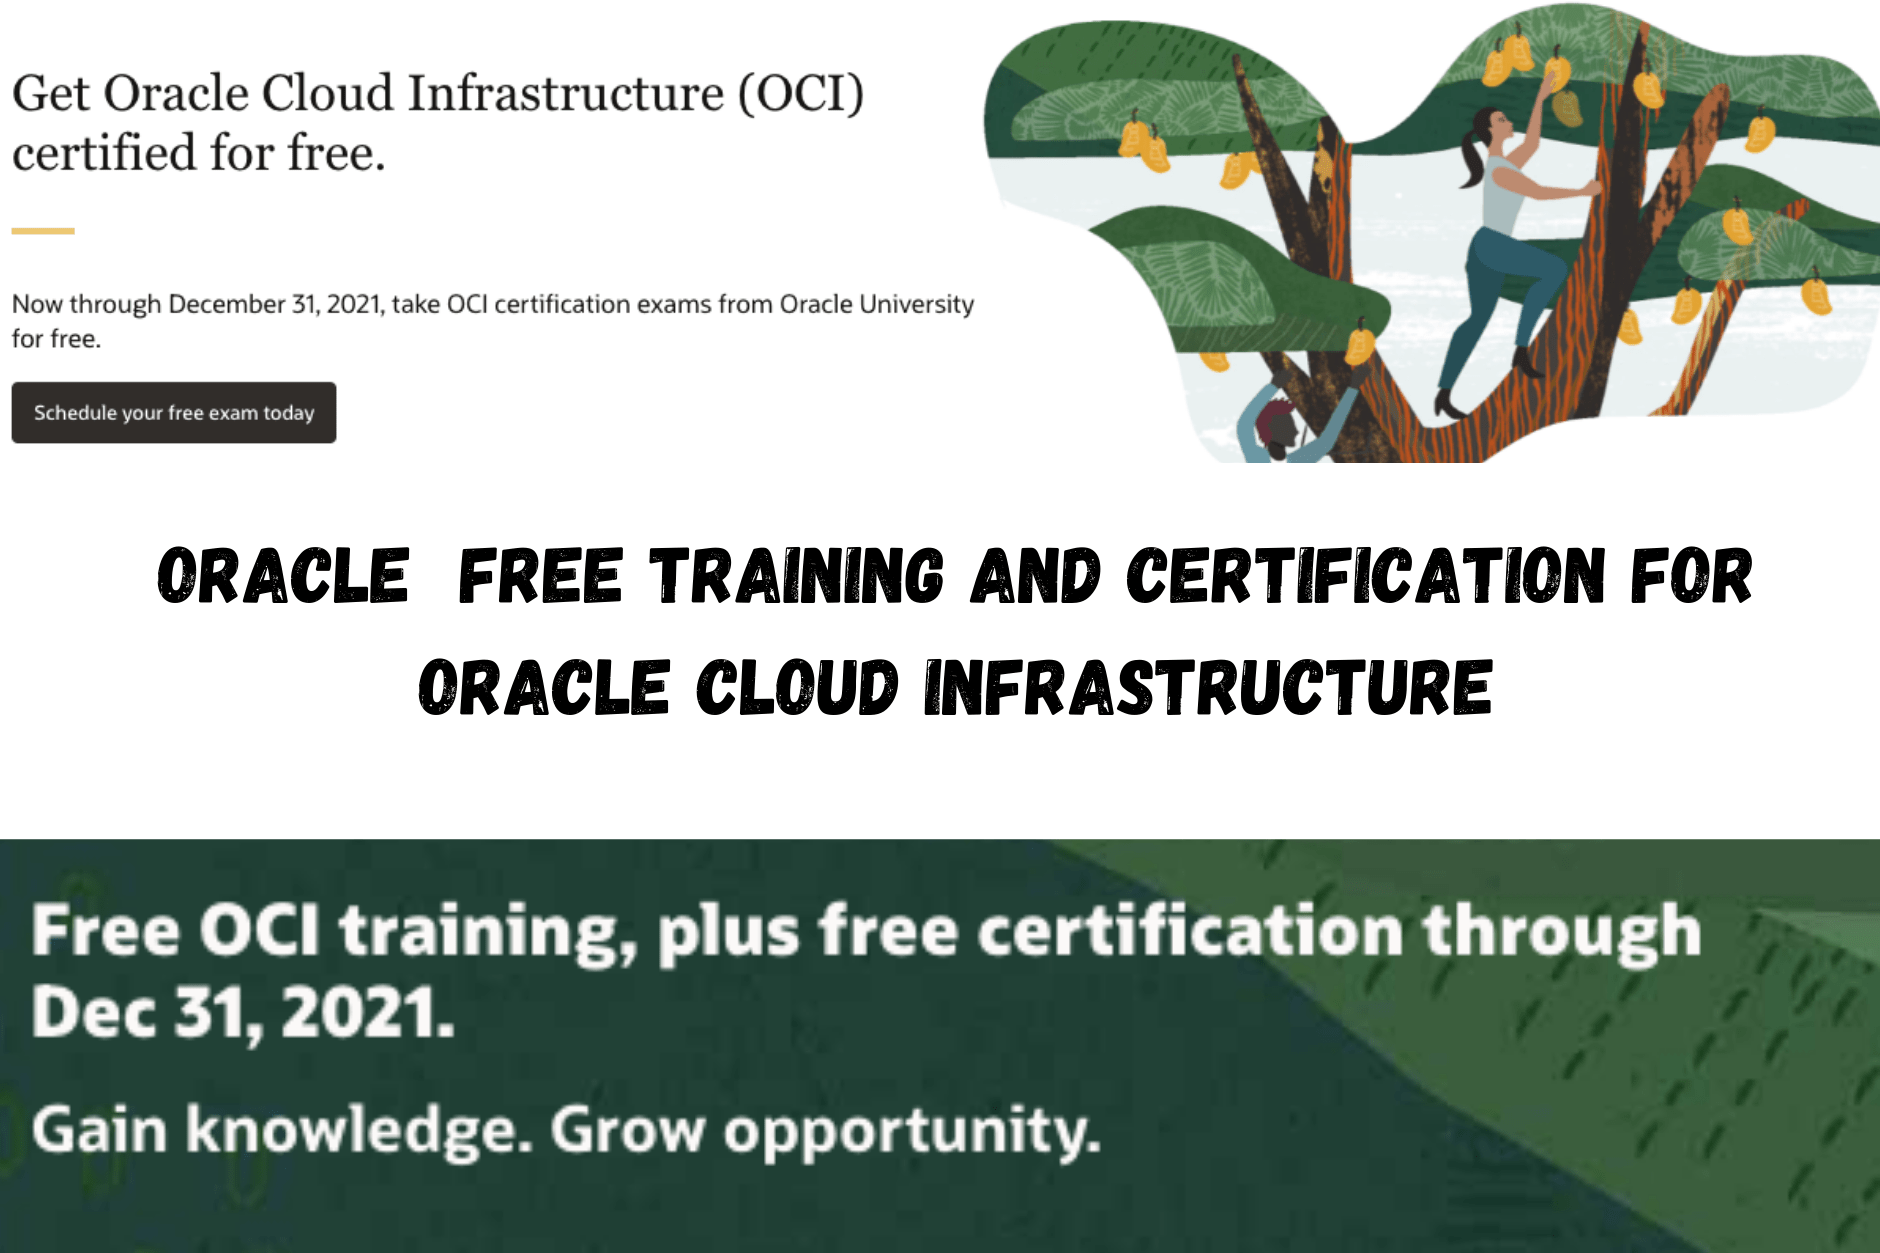 Oracle Free Training and Certification for Oracle Cloud Infrastructure